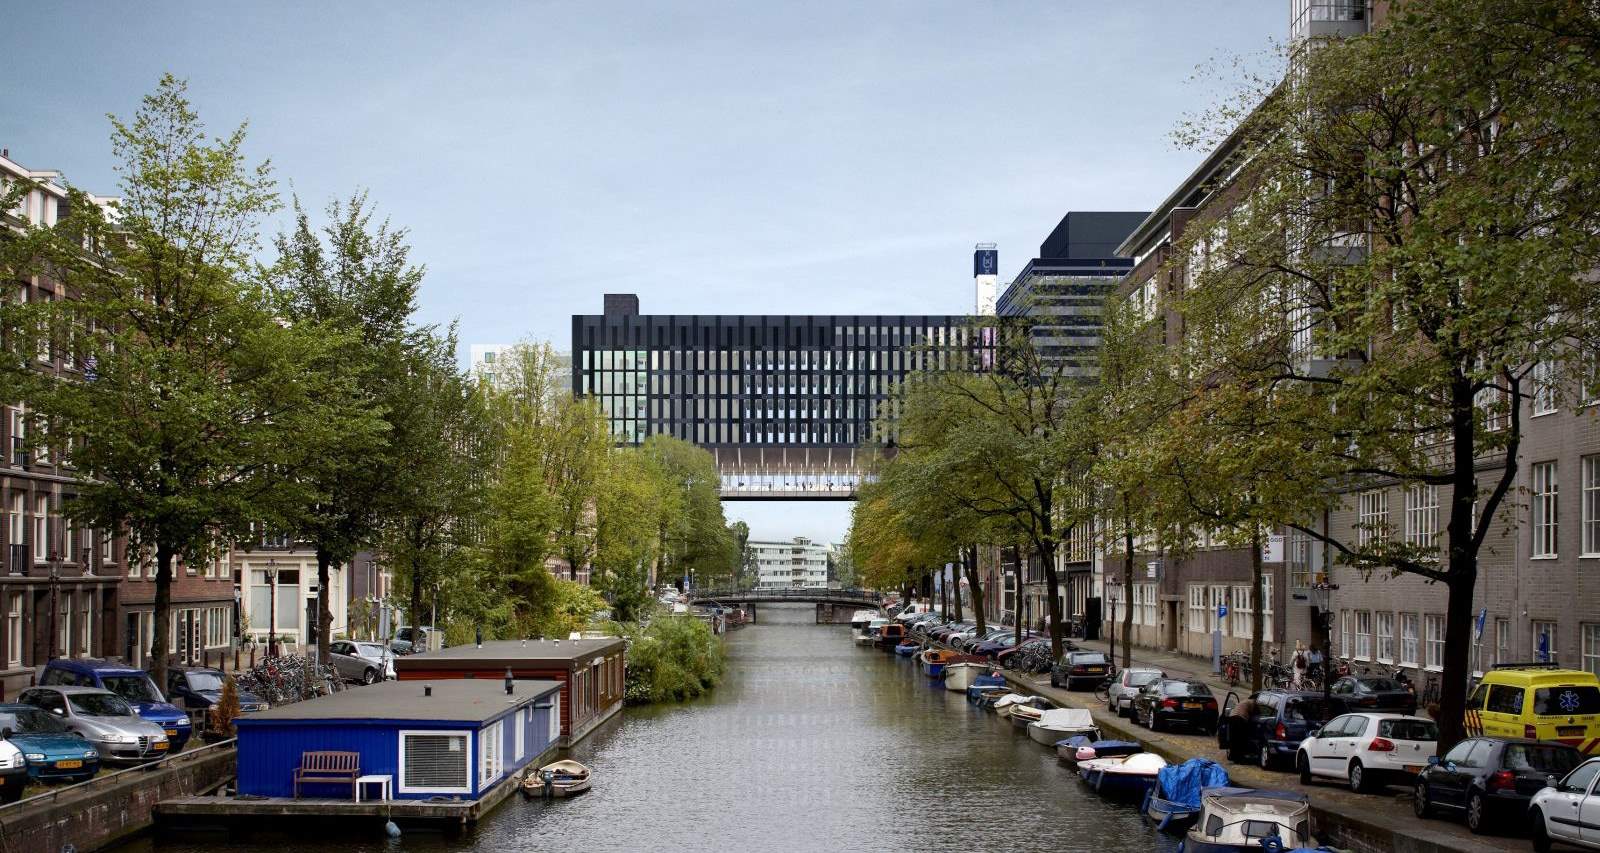 Amsterdam universities seek to lead the way on sustainable building Roeterseiland, Amsterdam, The Netherlands